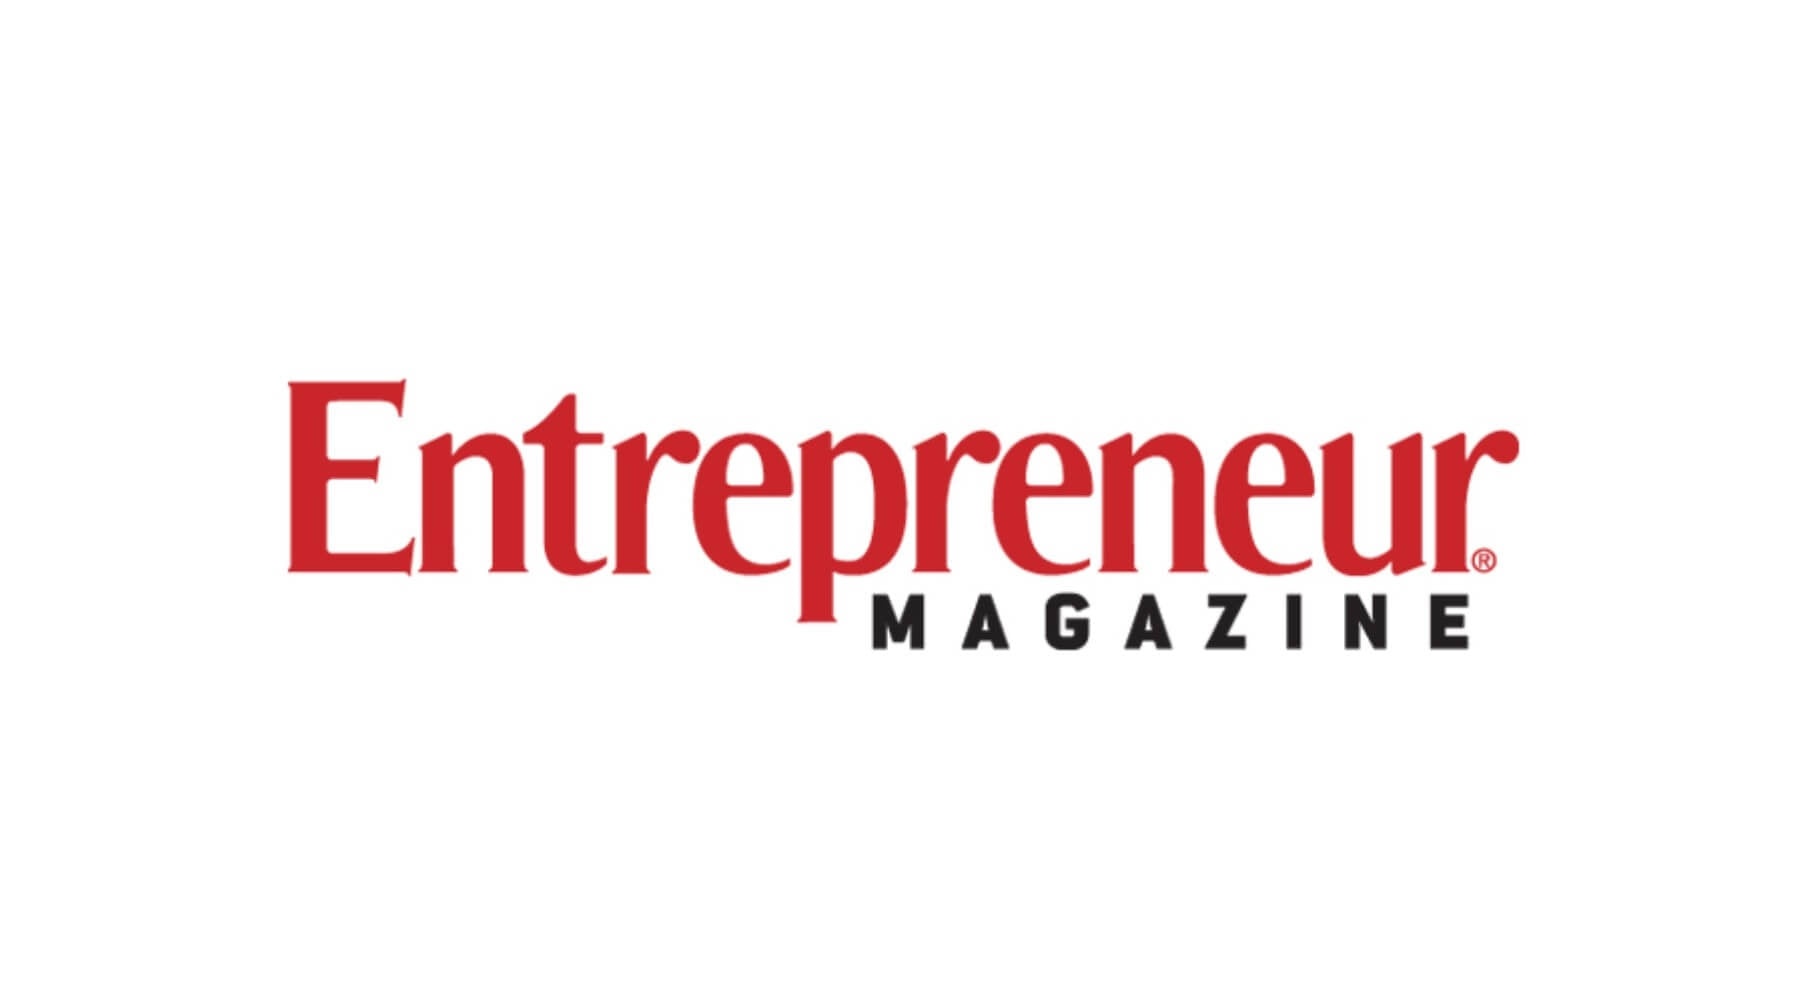 Andy Frisella Recognized By Entrepreneur Magazine As One of "Top 7 Instagram Accounts That Inspire Entrepreneurs"